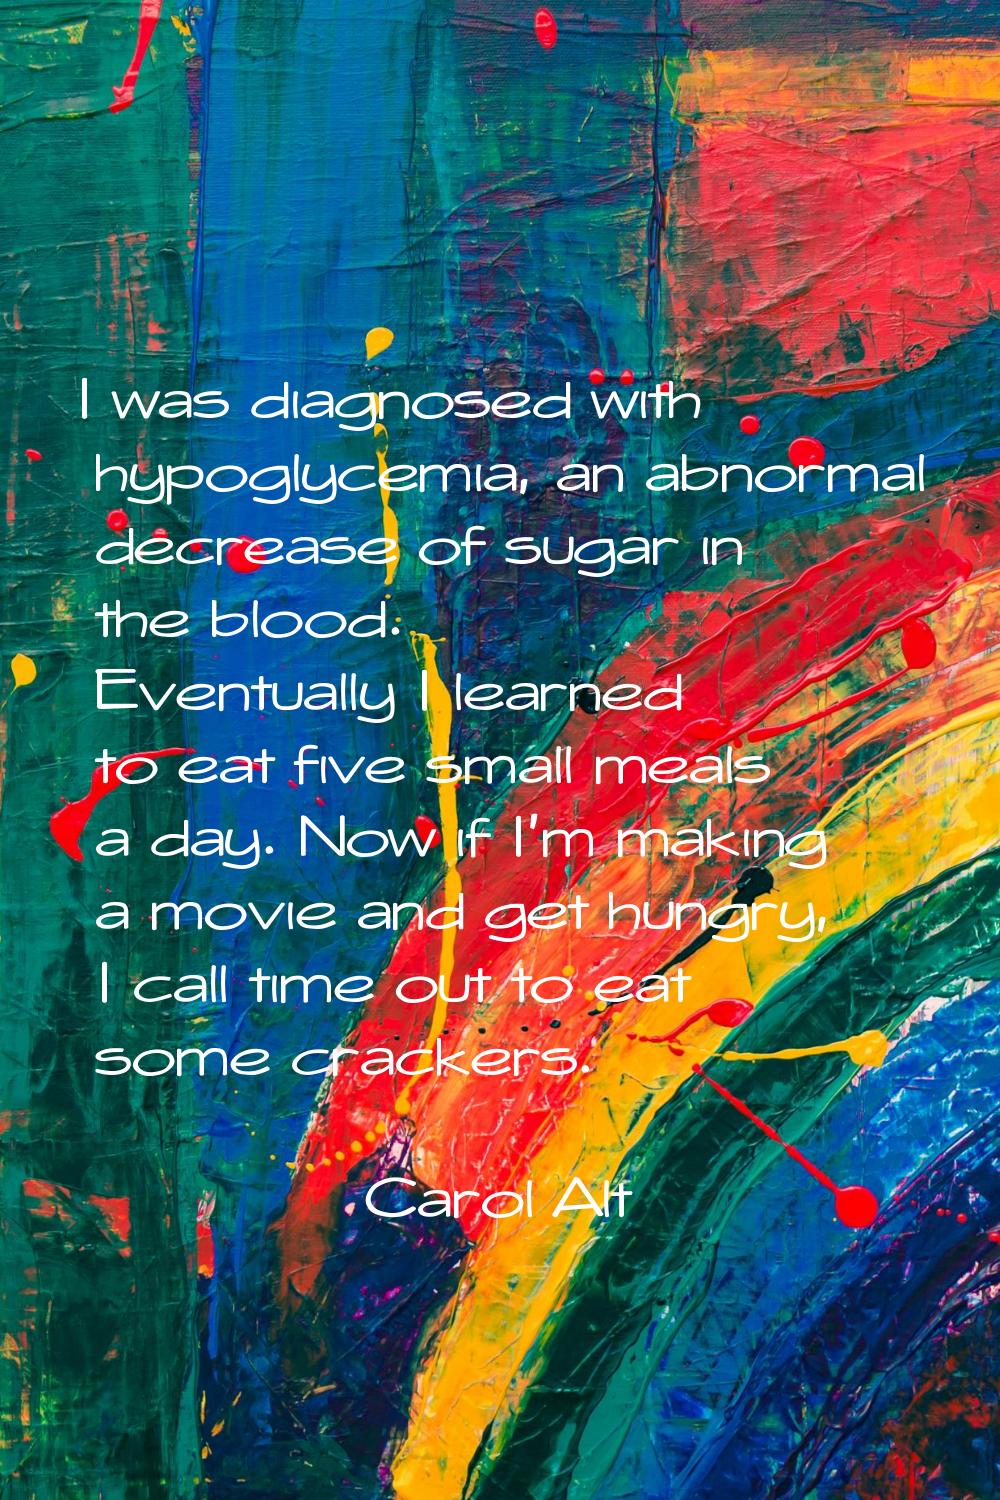 I was diagnosed with hypoglycemia, an abnormal decrease of sugar in the blood. Eventually I learned